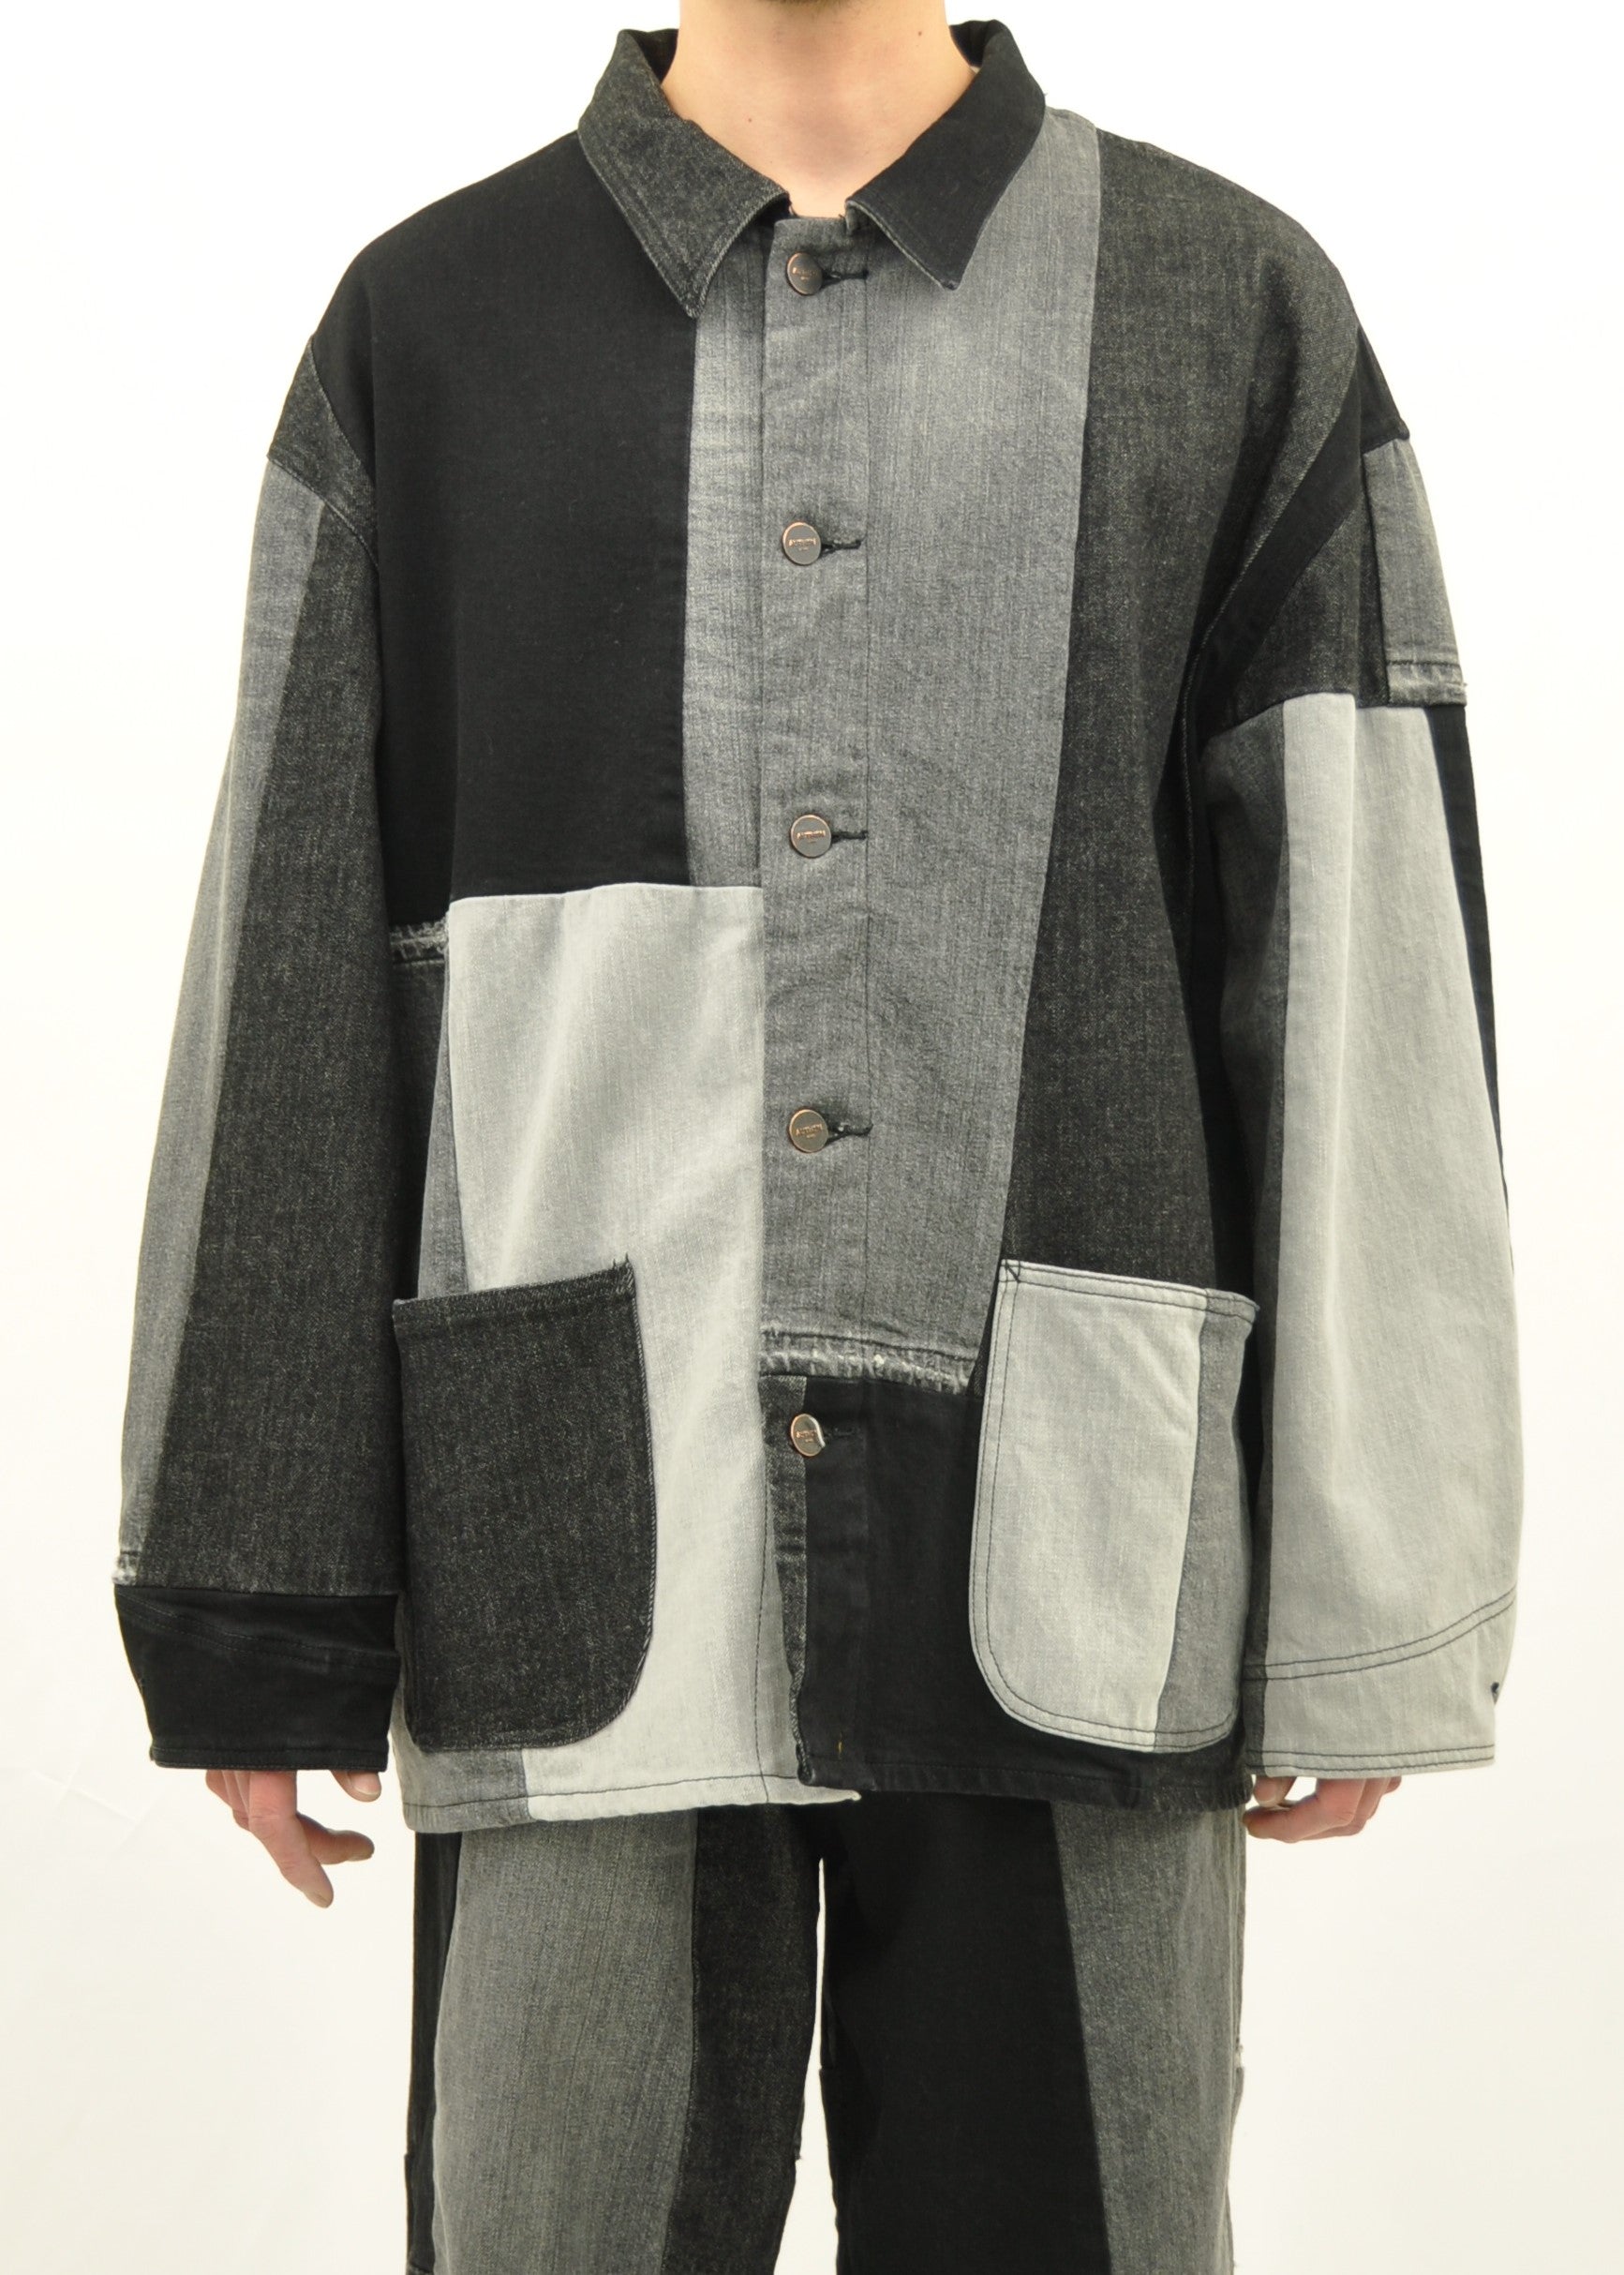 Up cycle patchwork jacket